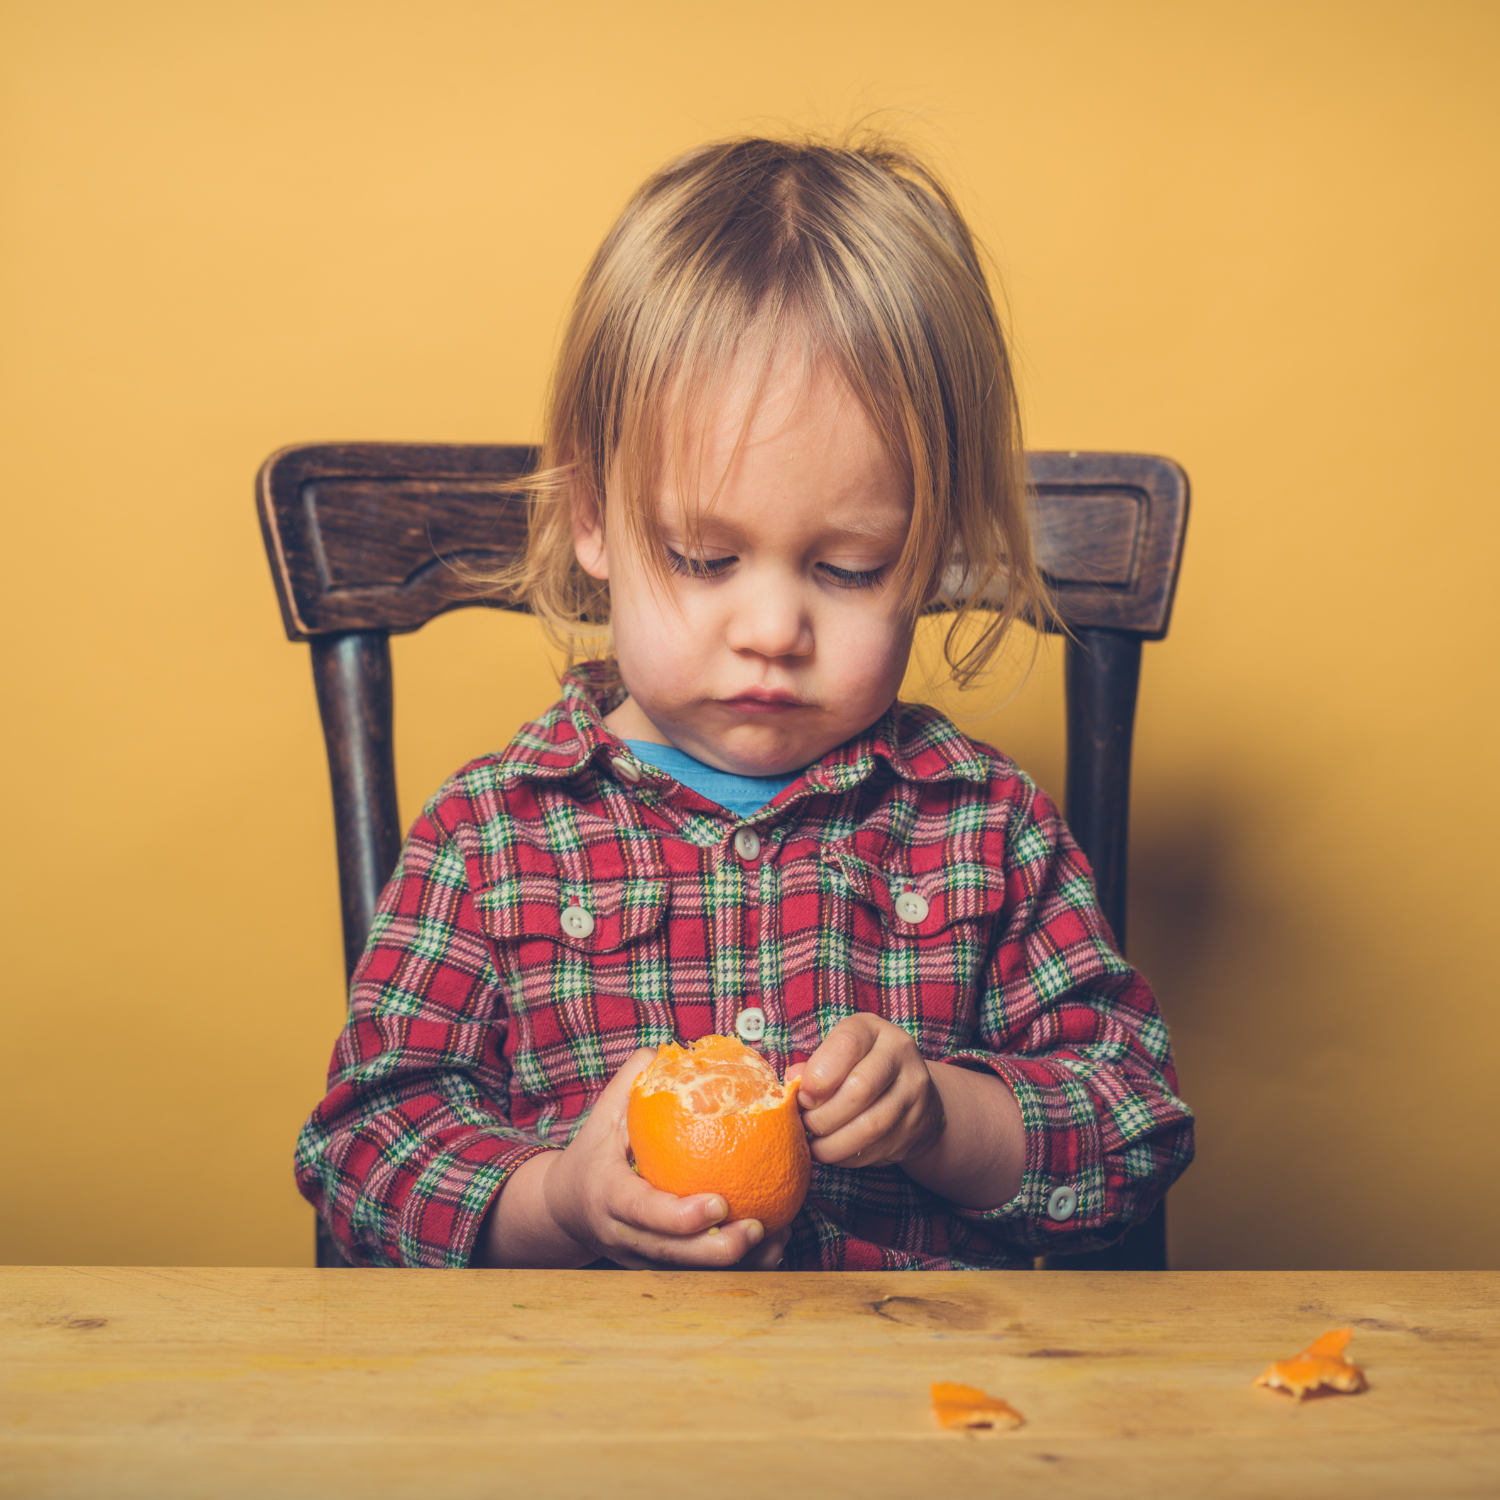 Blonde haired toddler wearing checkered shirt sat on a chair peeling an orange - Clair de Lune UK